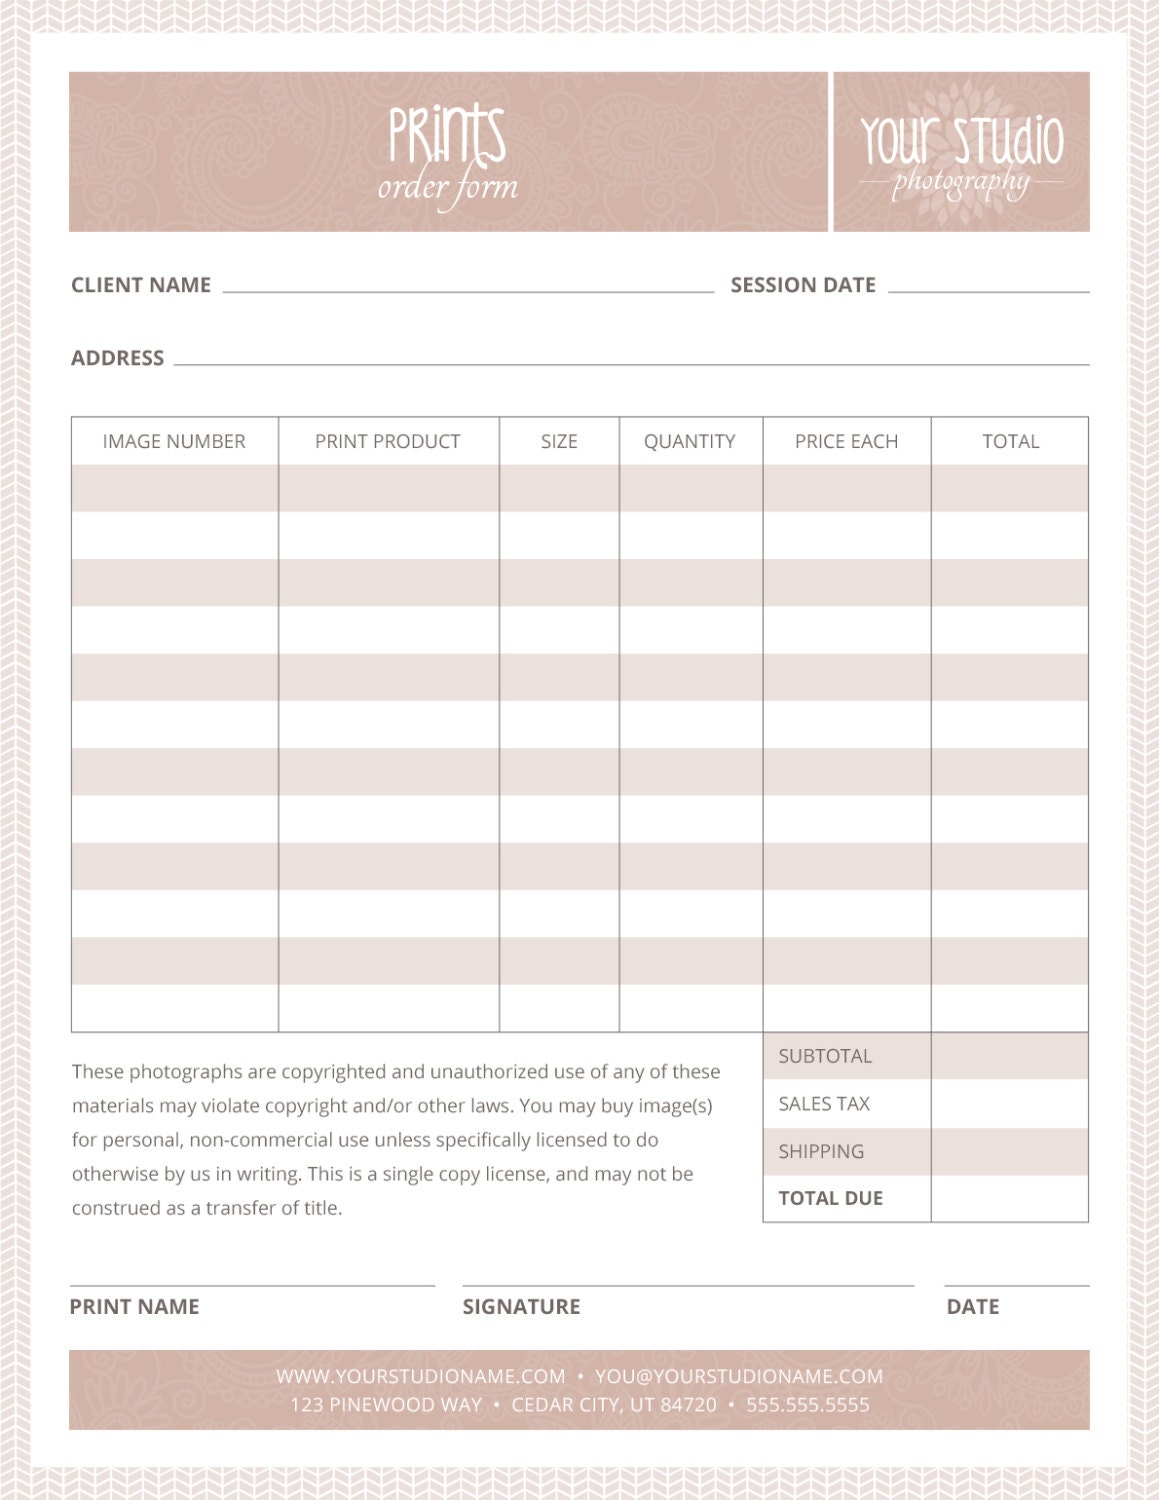 prints-order-form-template-for-photographers-by-cherrybloomdesign